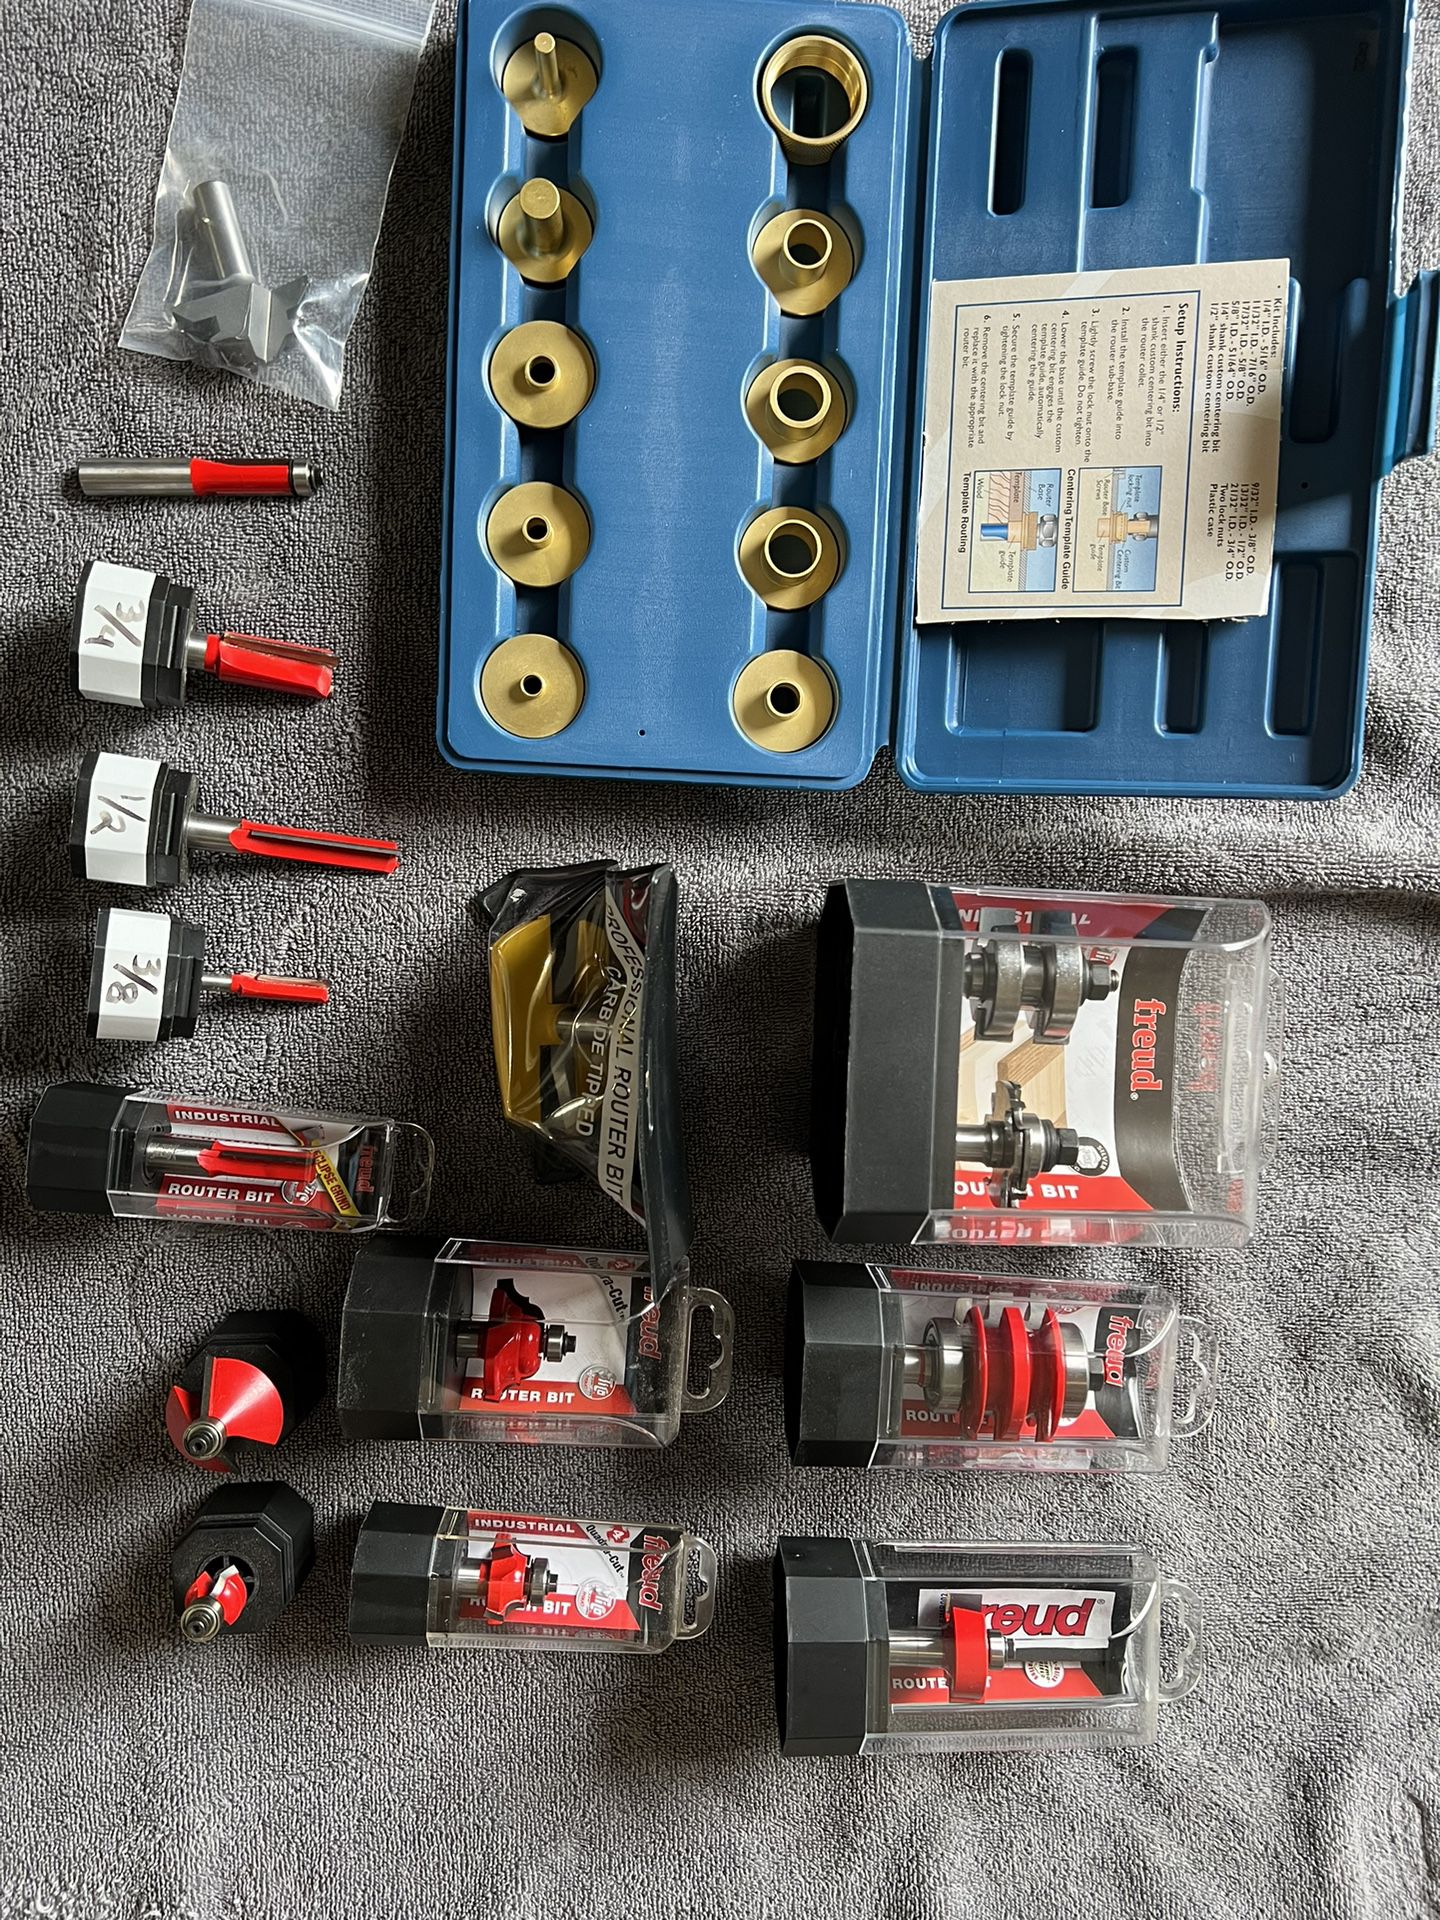 Set Of Router Bits